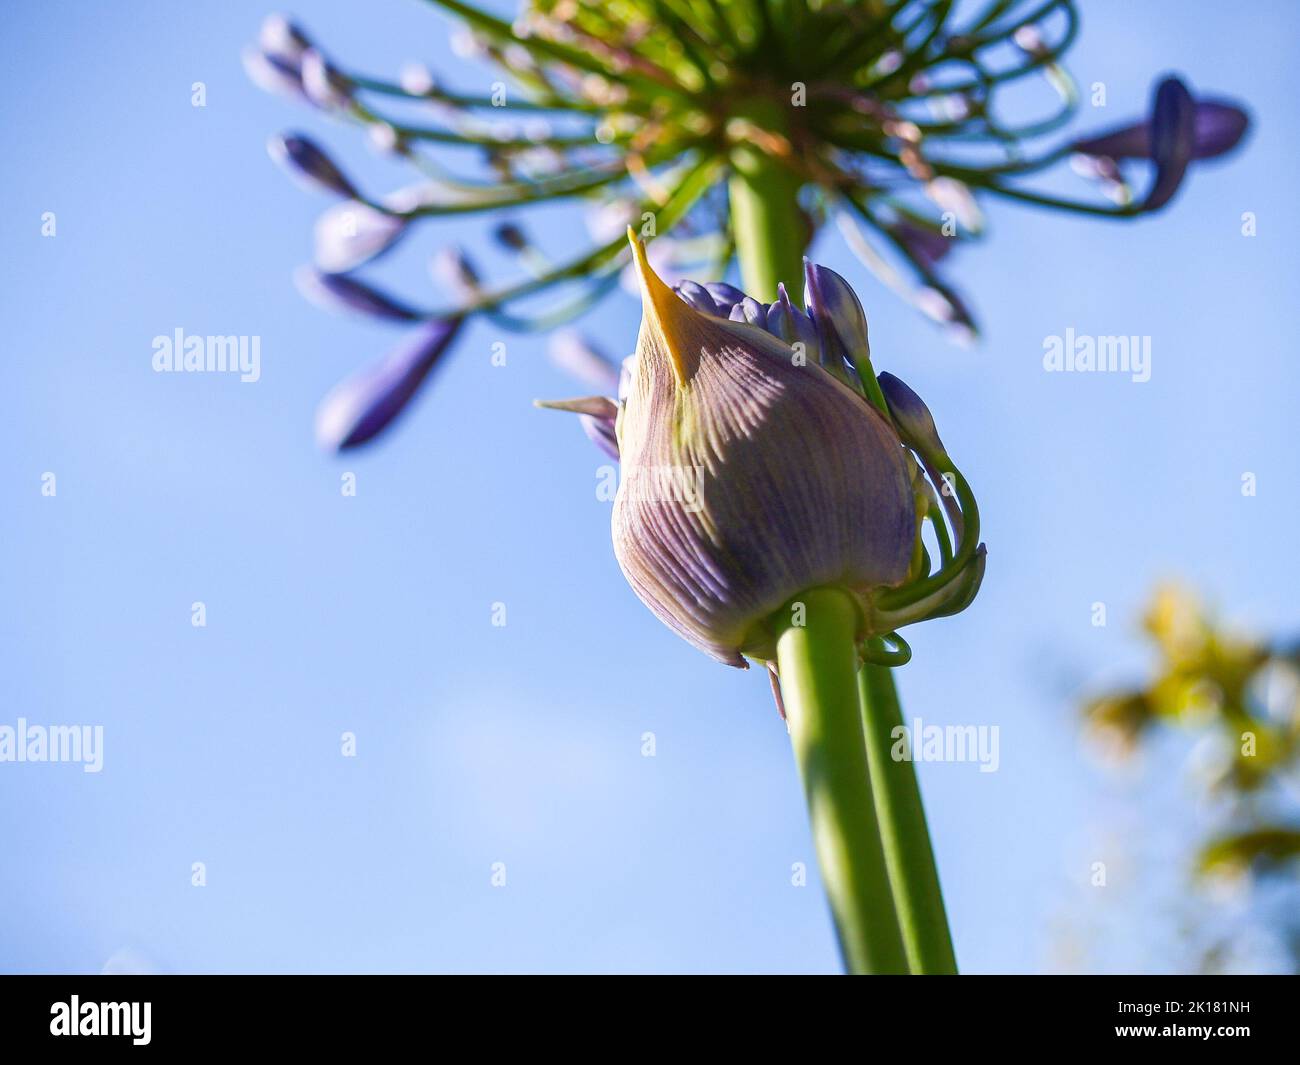 Blooming-agapanthus flower against blue sky. Stock Photo